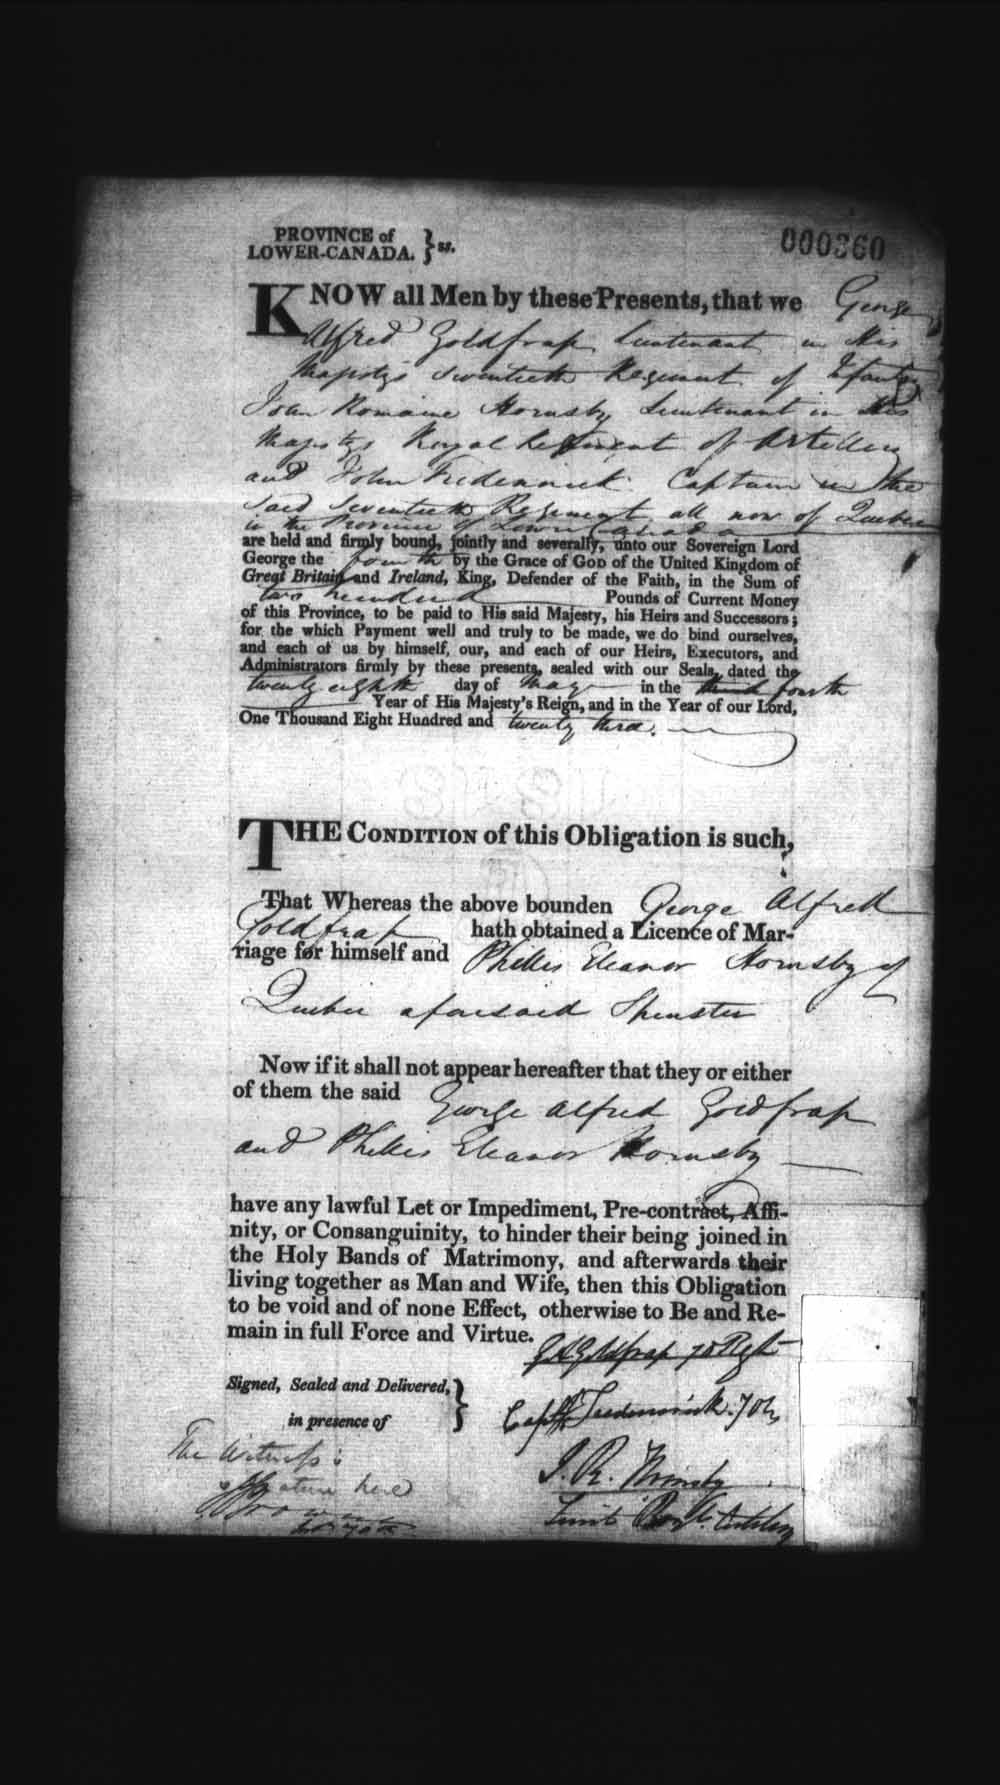 Digitized page of Upper and Lower Canada Marriage Bonds (1779-1865) for Image No.: e008236248